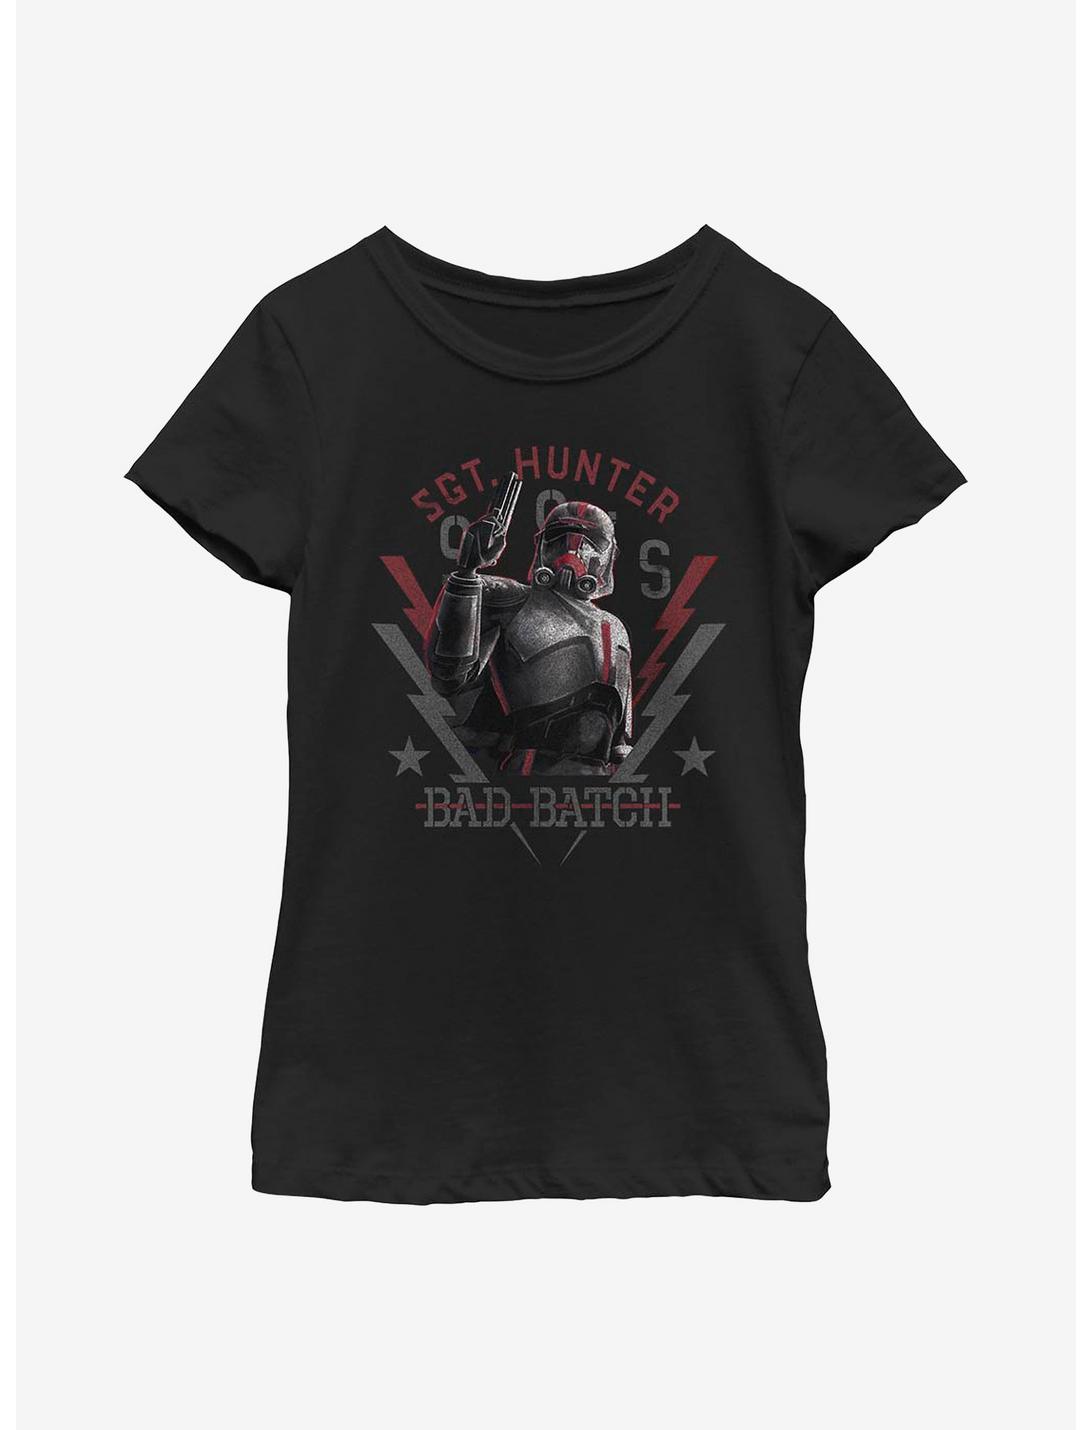 Star Wars: The Bad Batch Hunter Army Crate Youth Girls T-Shirt, BLACK, hi-res